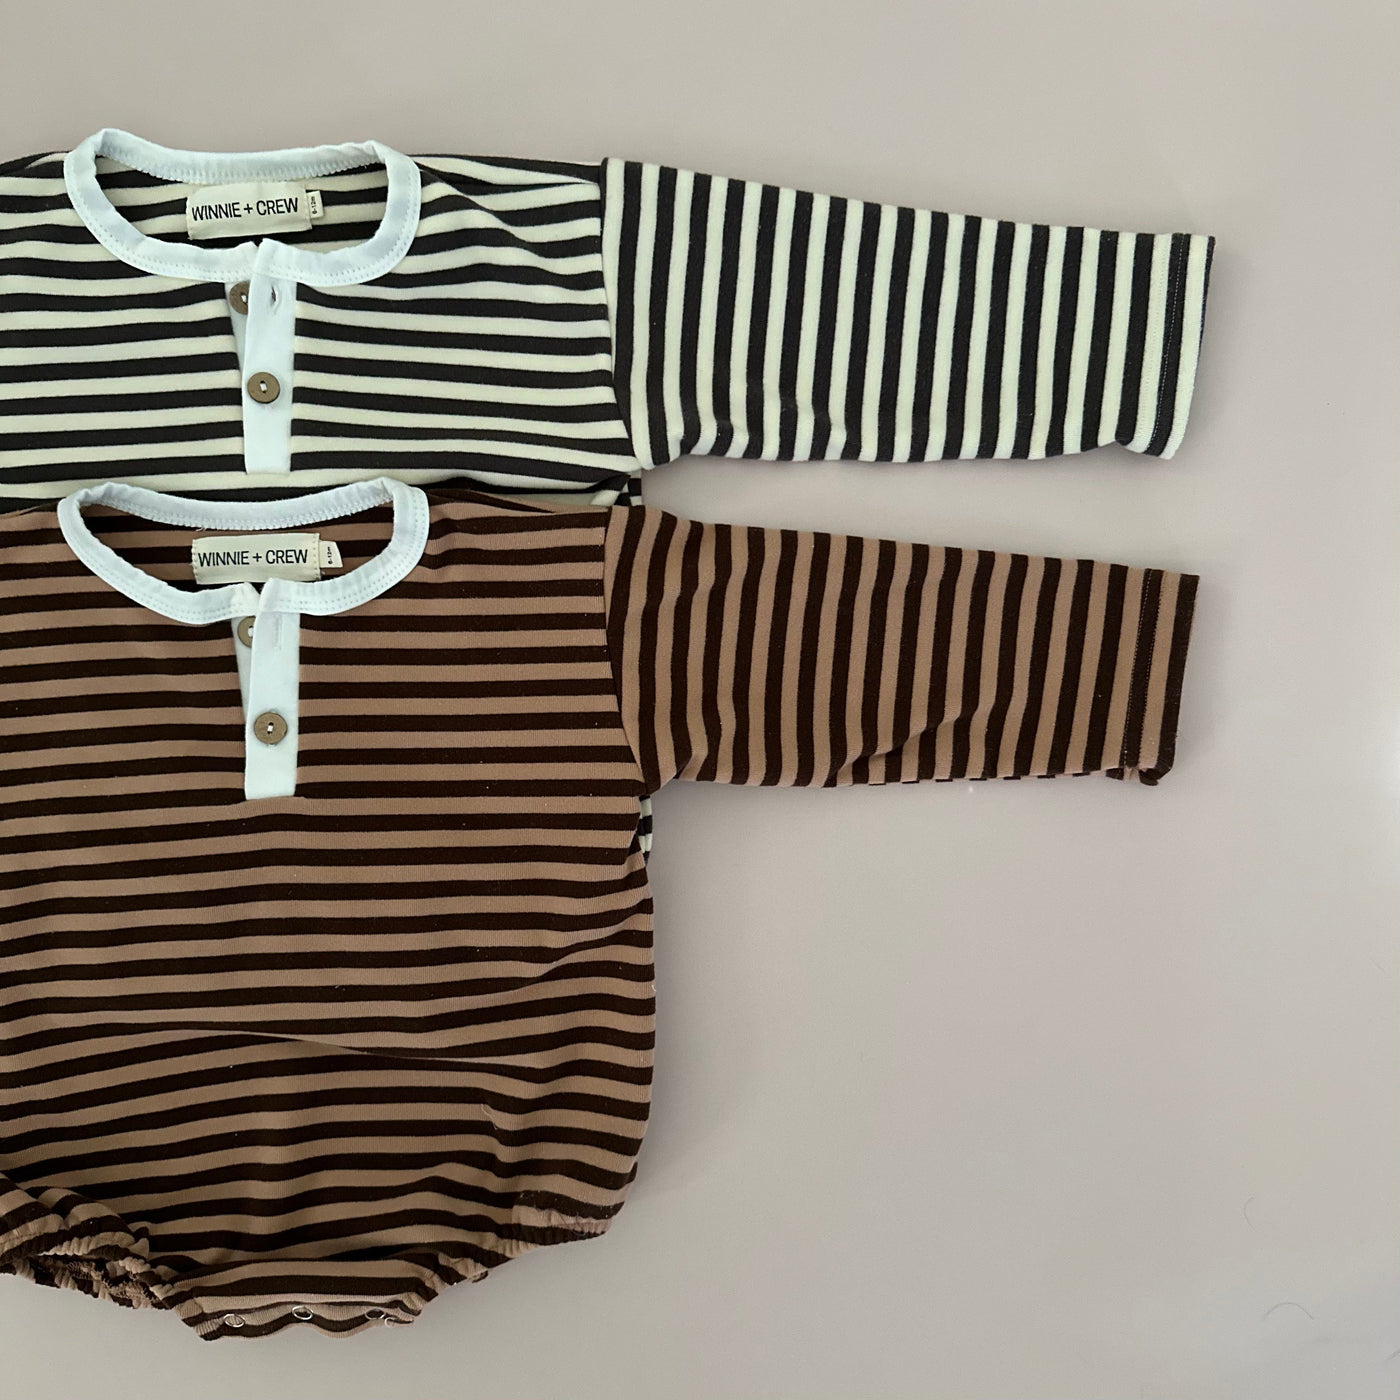 a pair of baby clothes